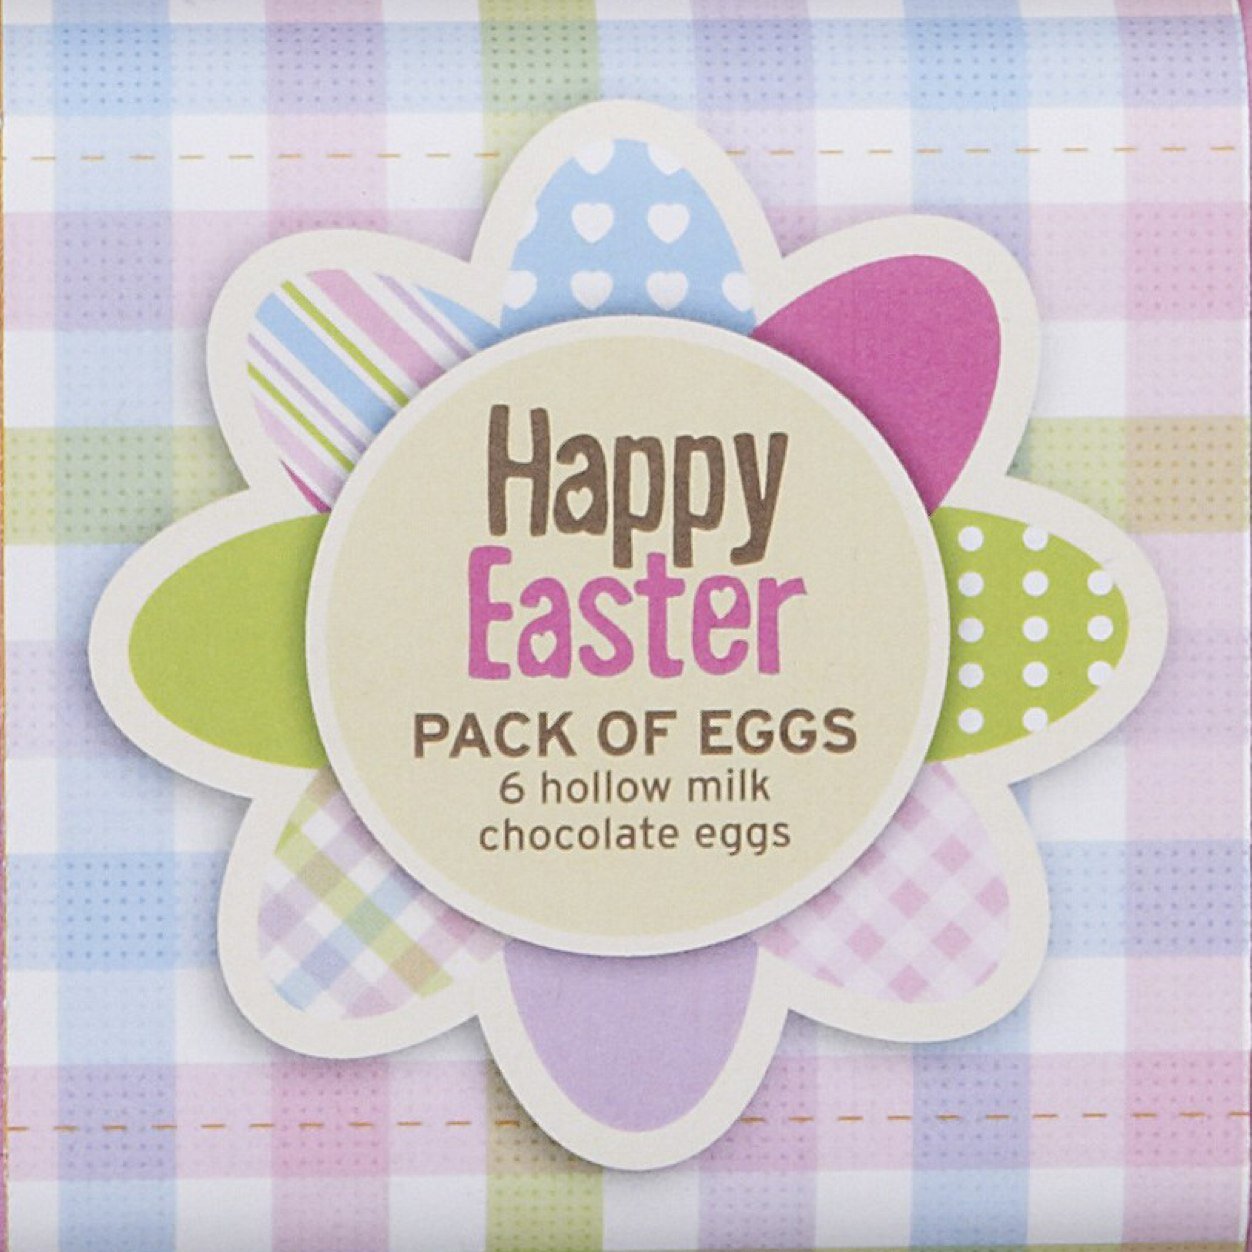 Share your Easter Fun & Activity - Tesco Express The Place 2B